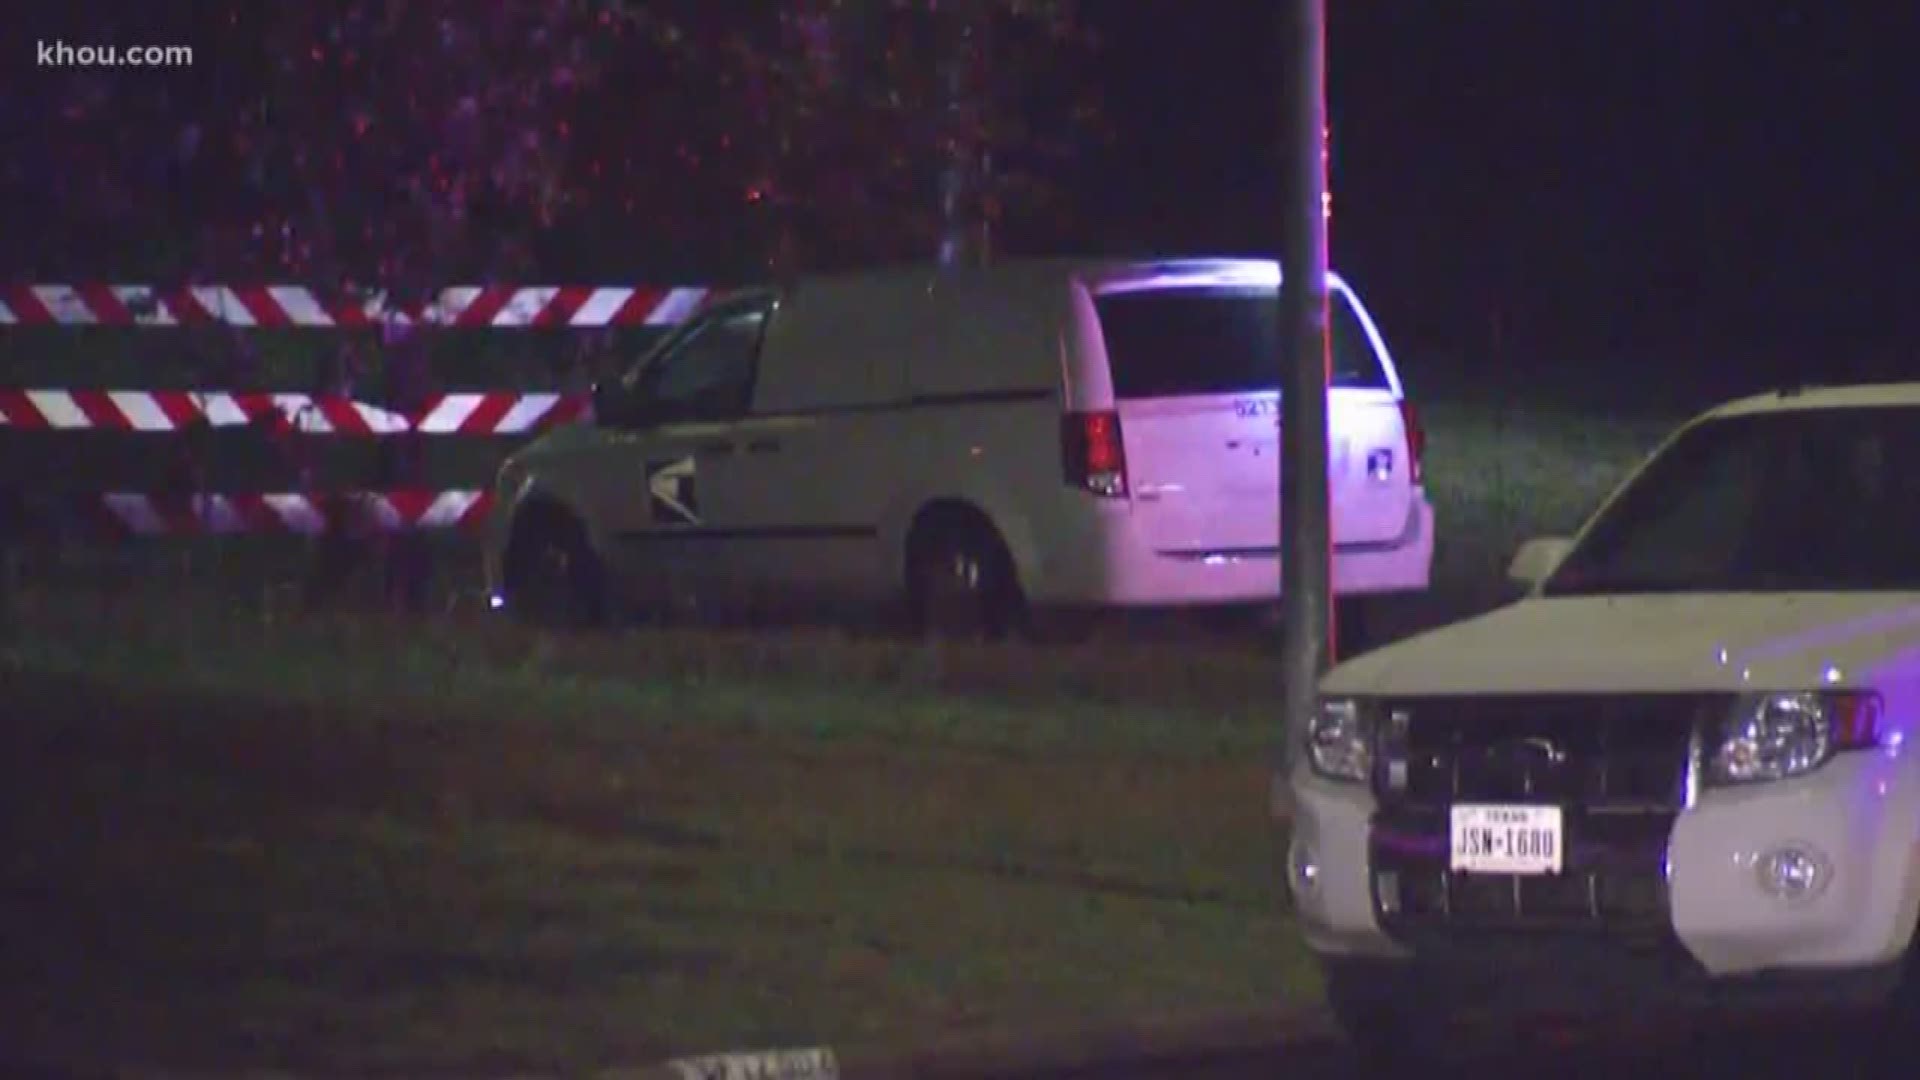 Police are searching for three armed men they say carjacked a U.S. Postal worker in southwest Houston.